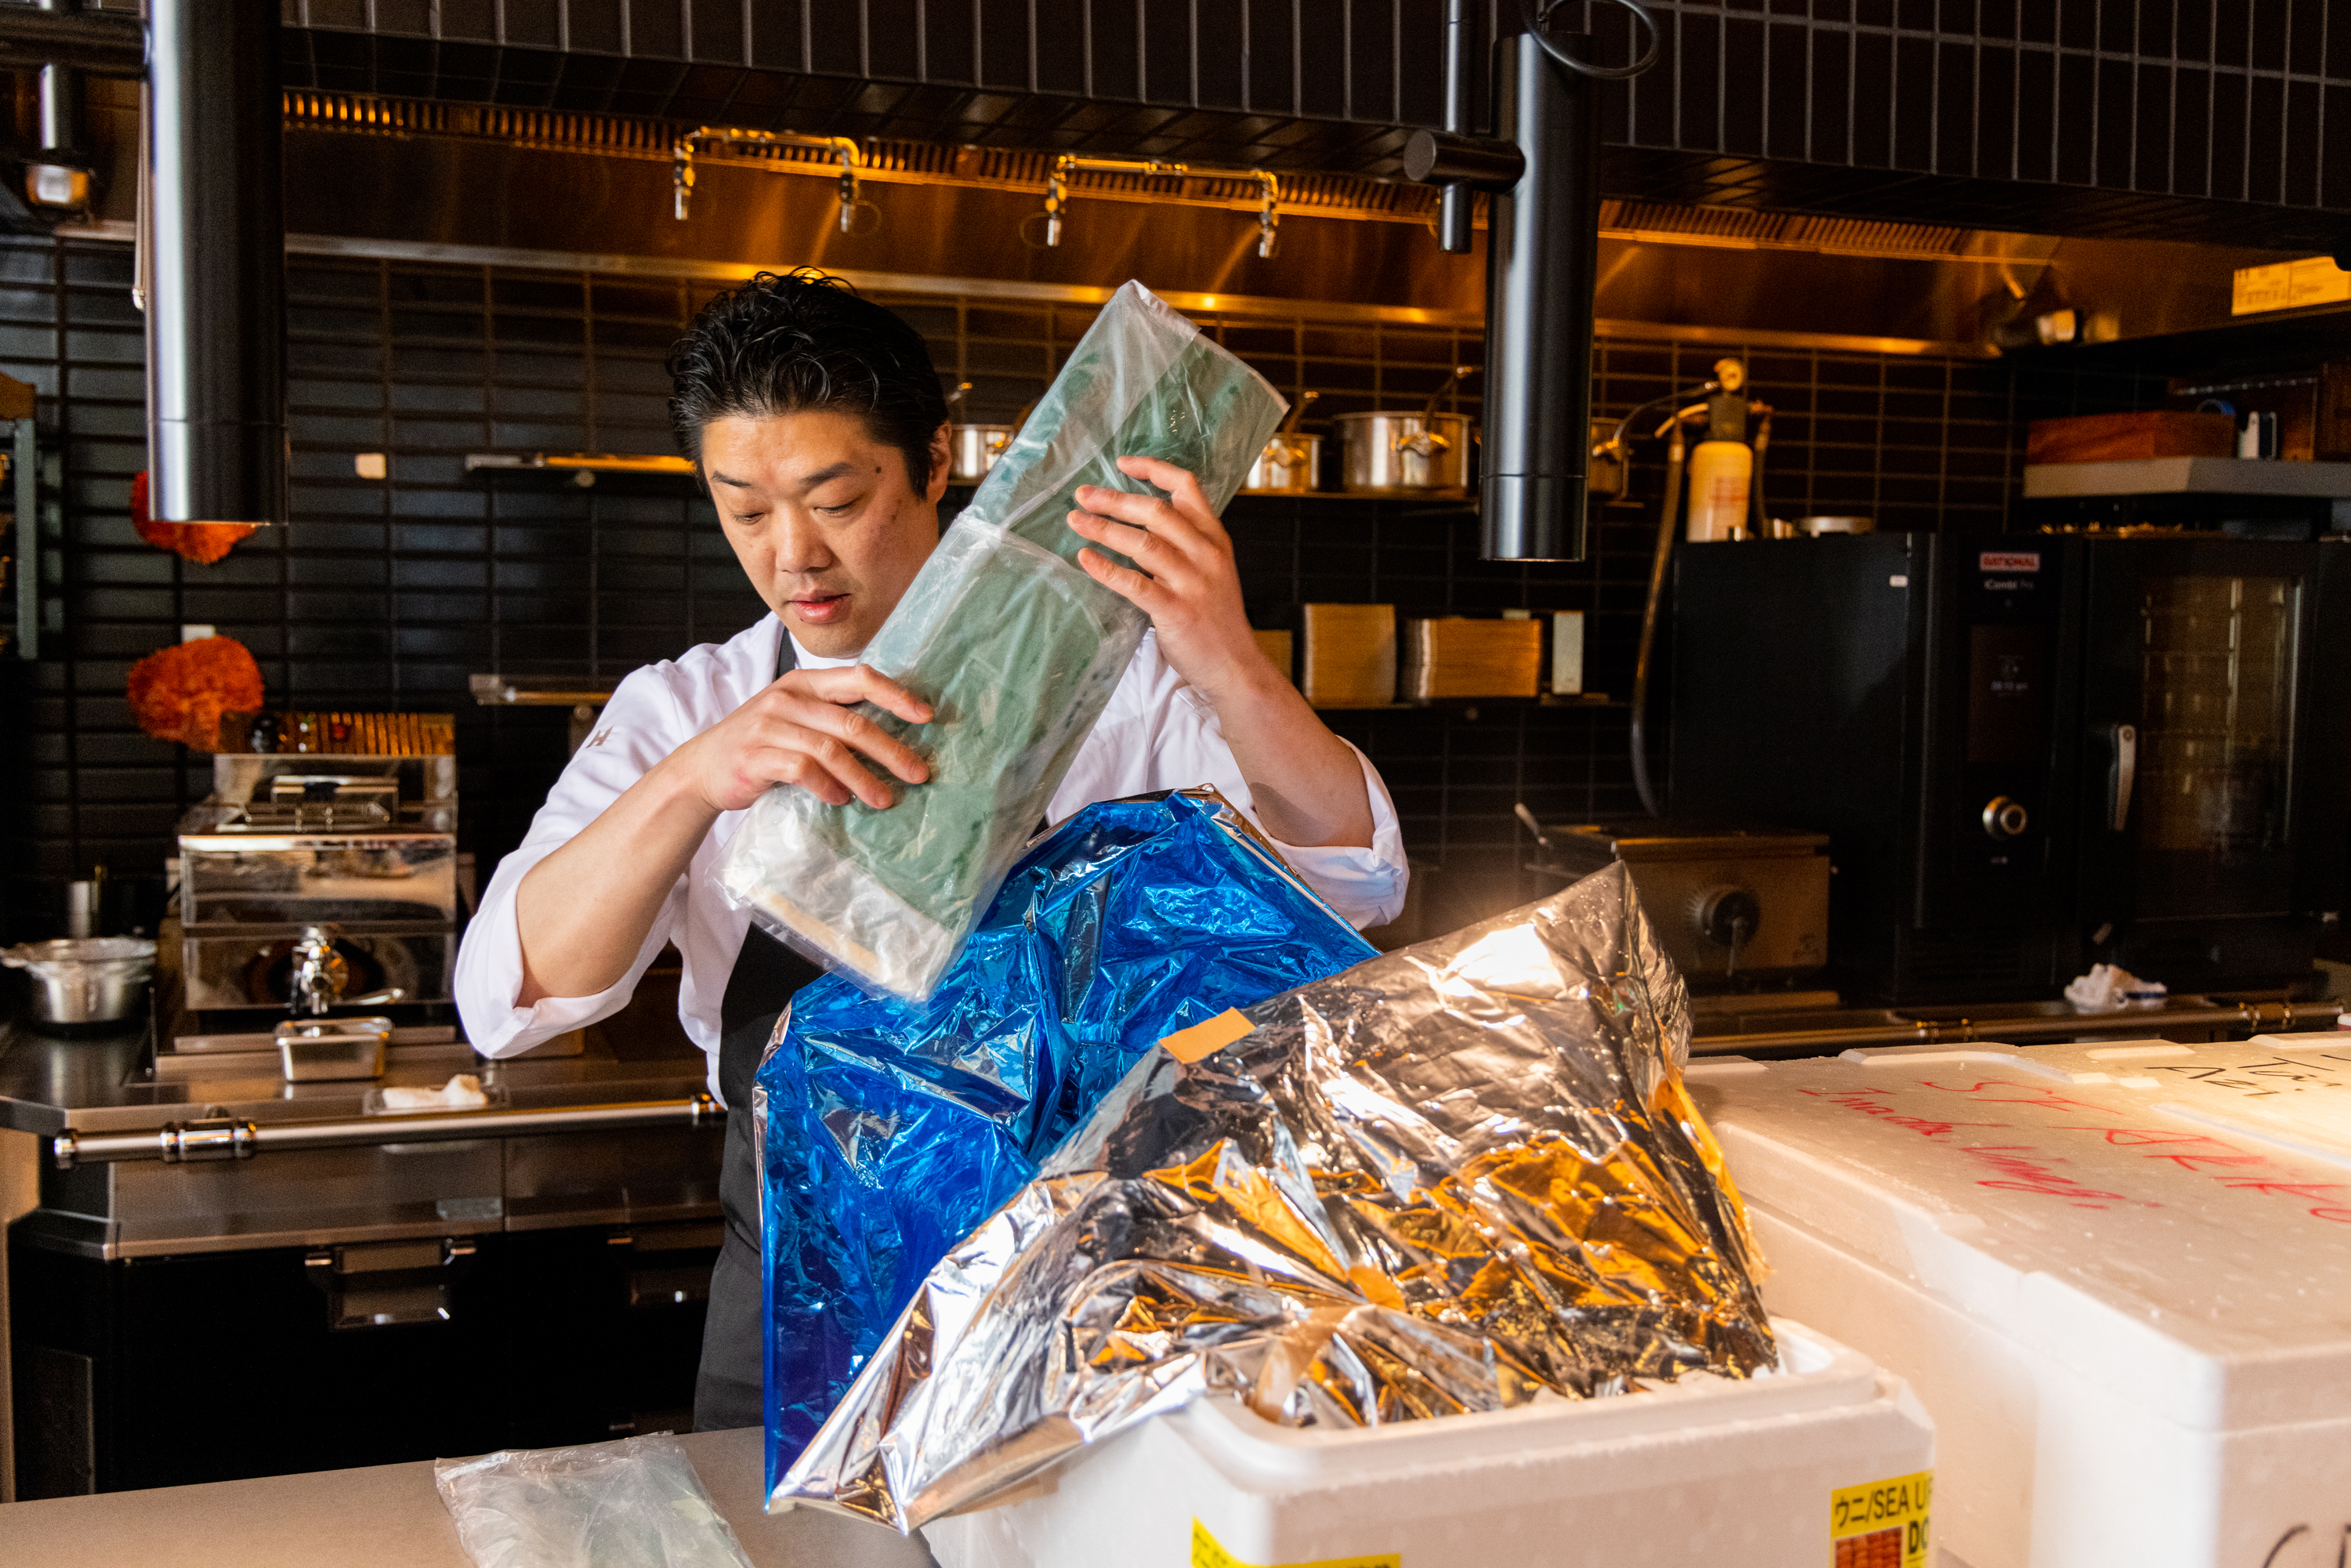 A chef in a white uniform stands in a kitchen, unwrapping items from shiny foil and plastic bags, possibly unpacking supplies from large styrofoam boxes.